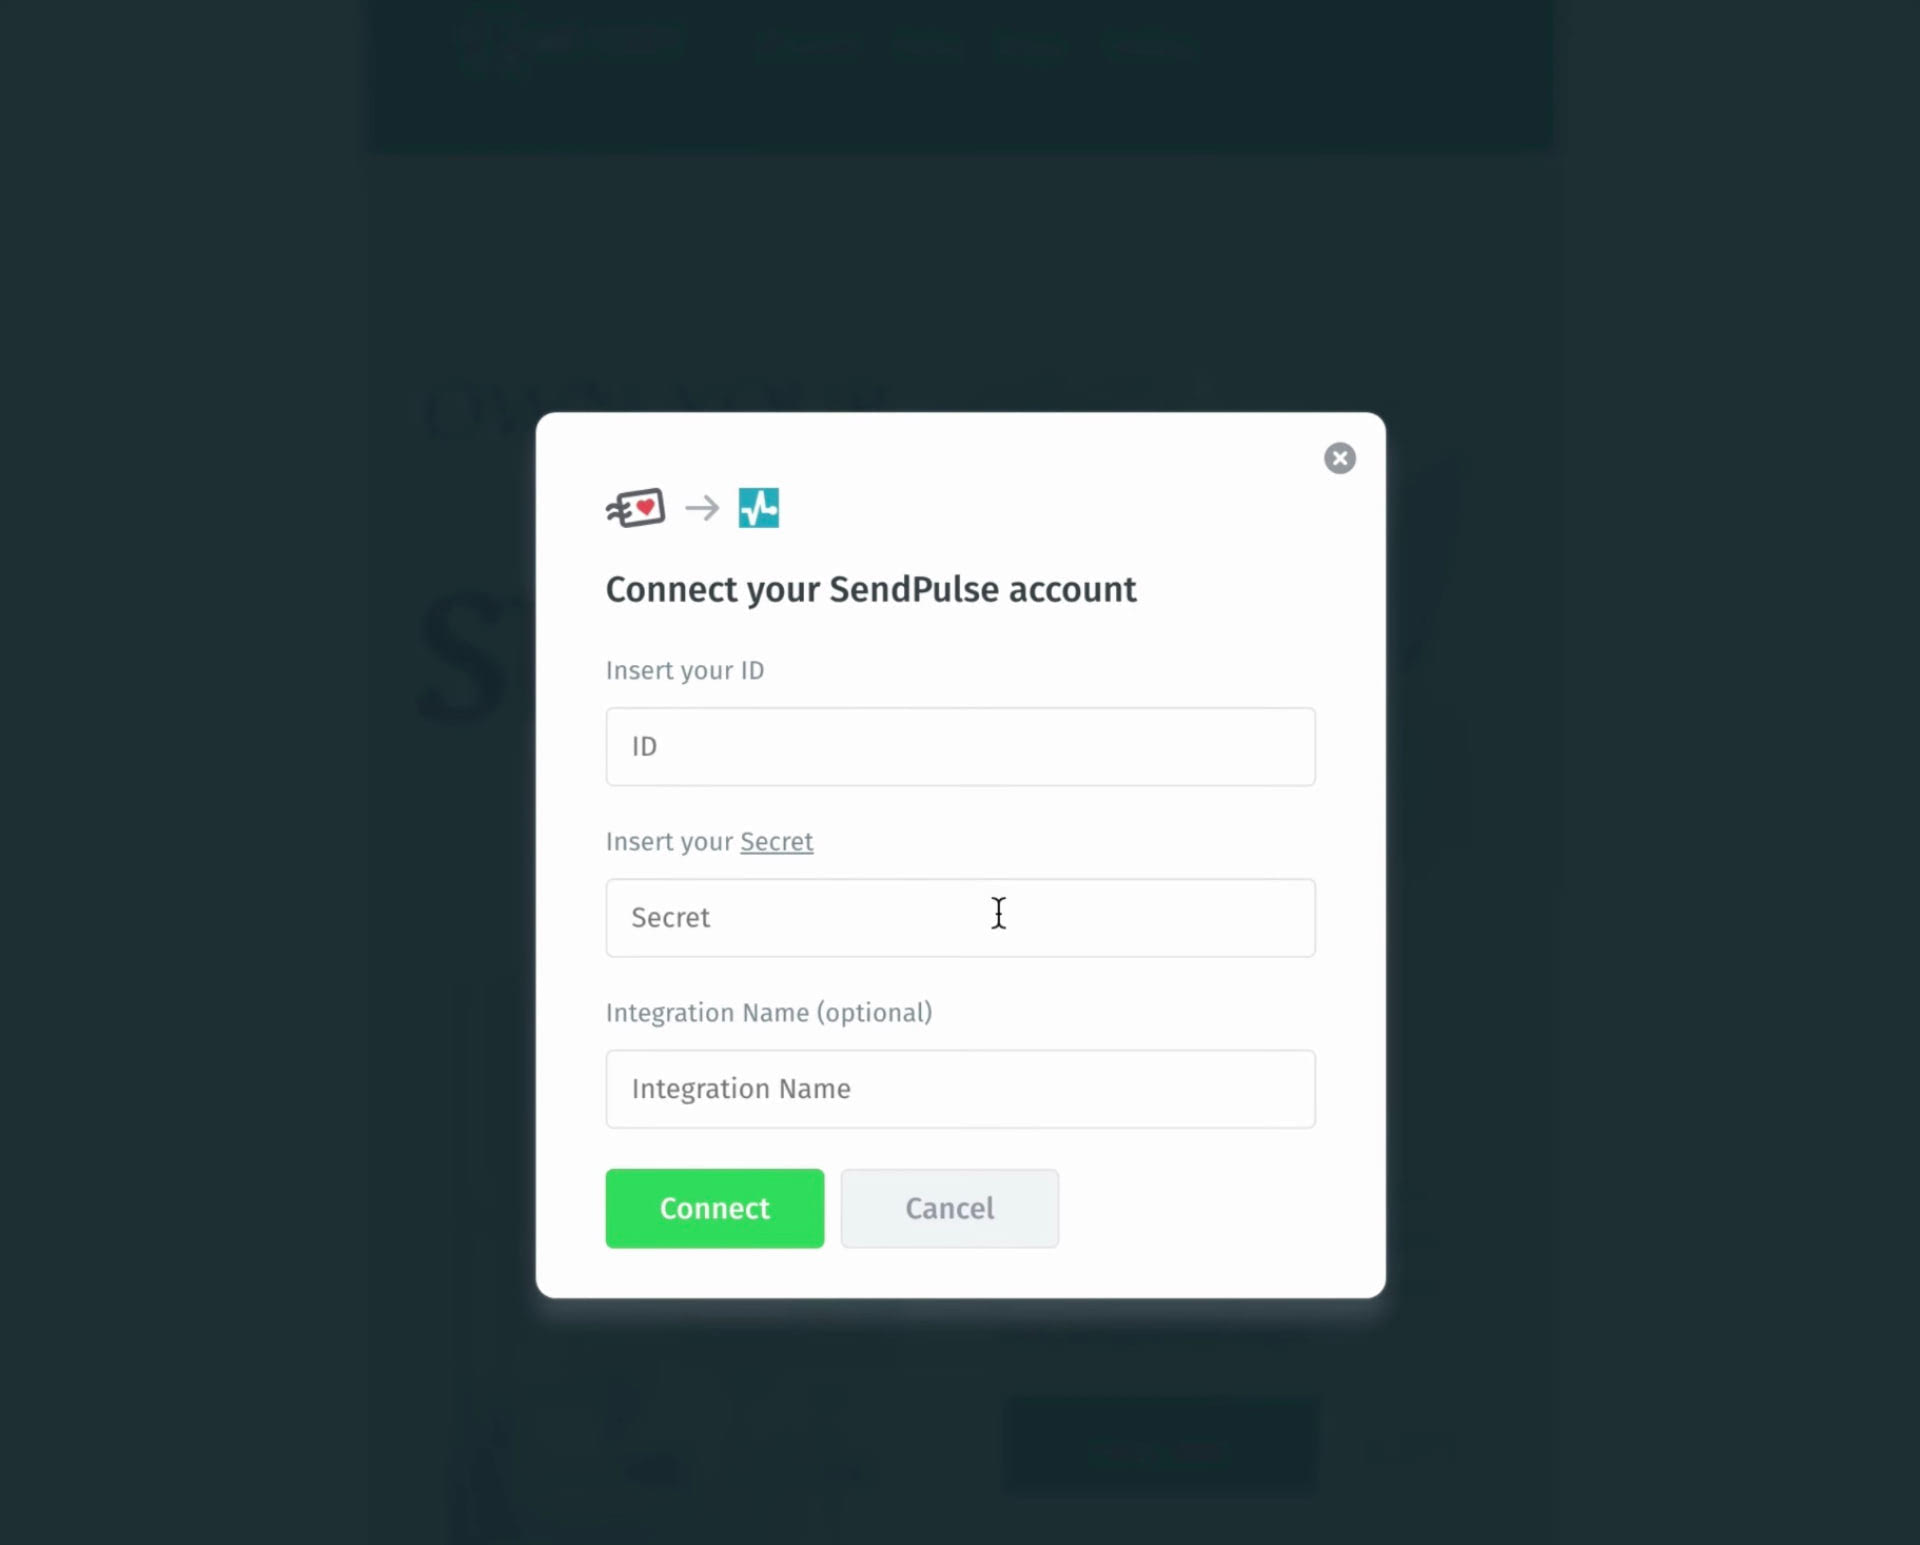 Authenticating Your Account